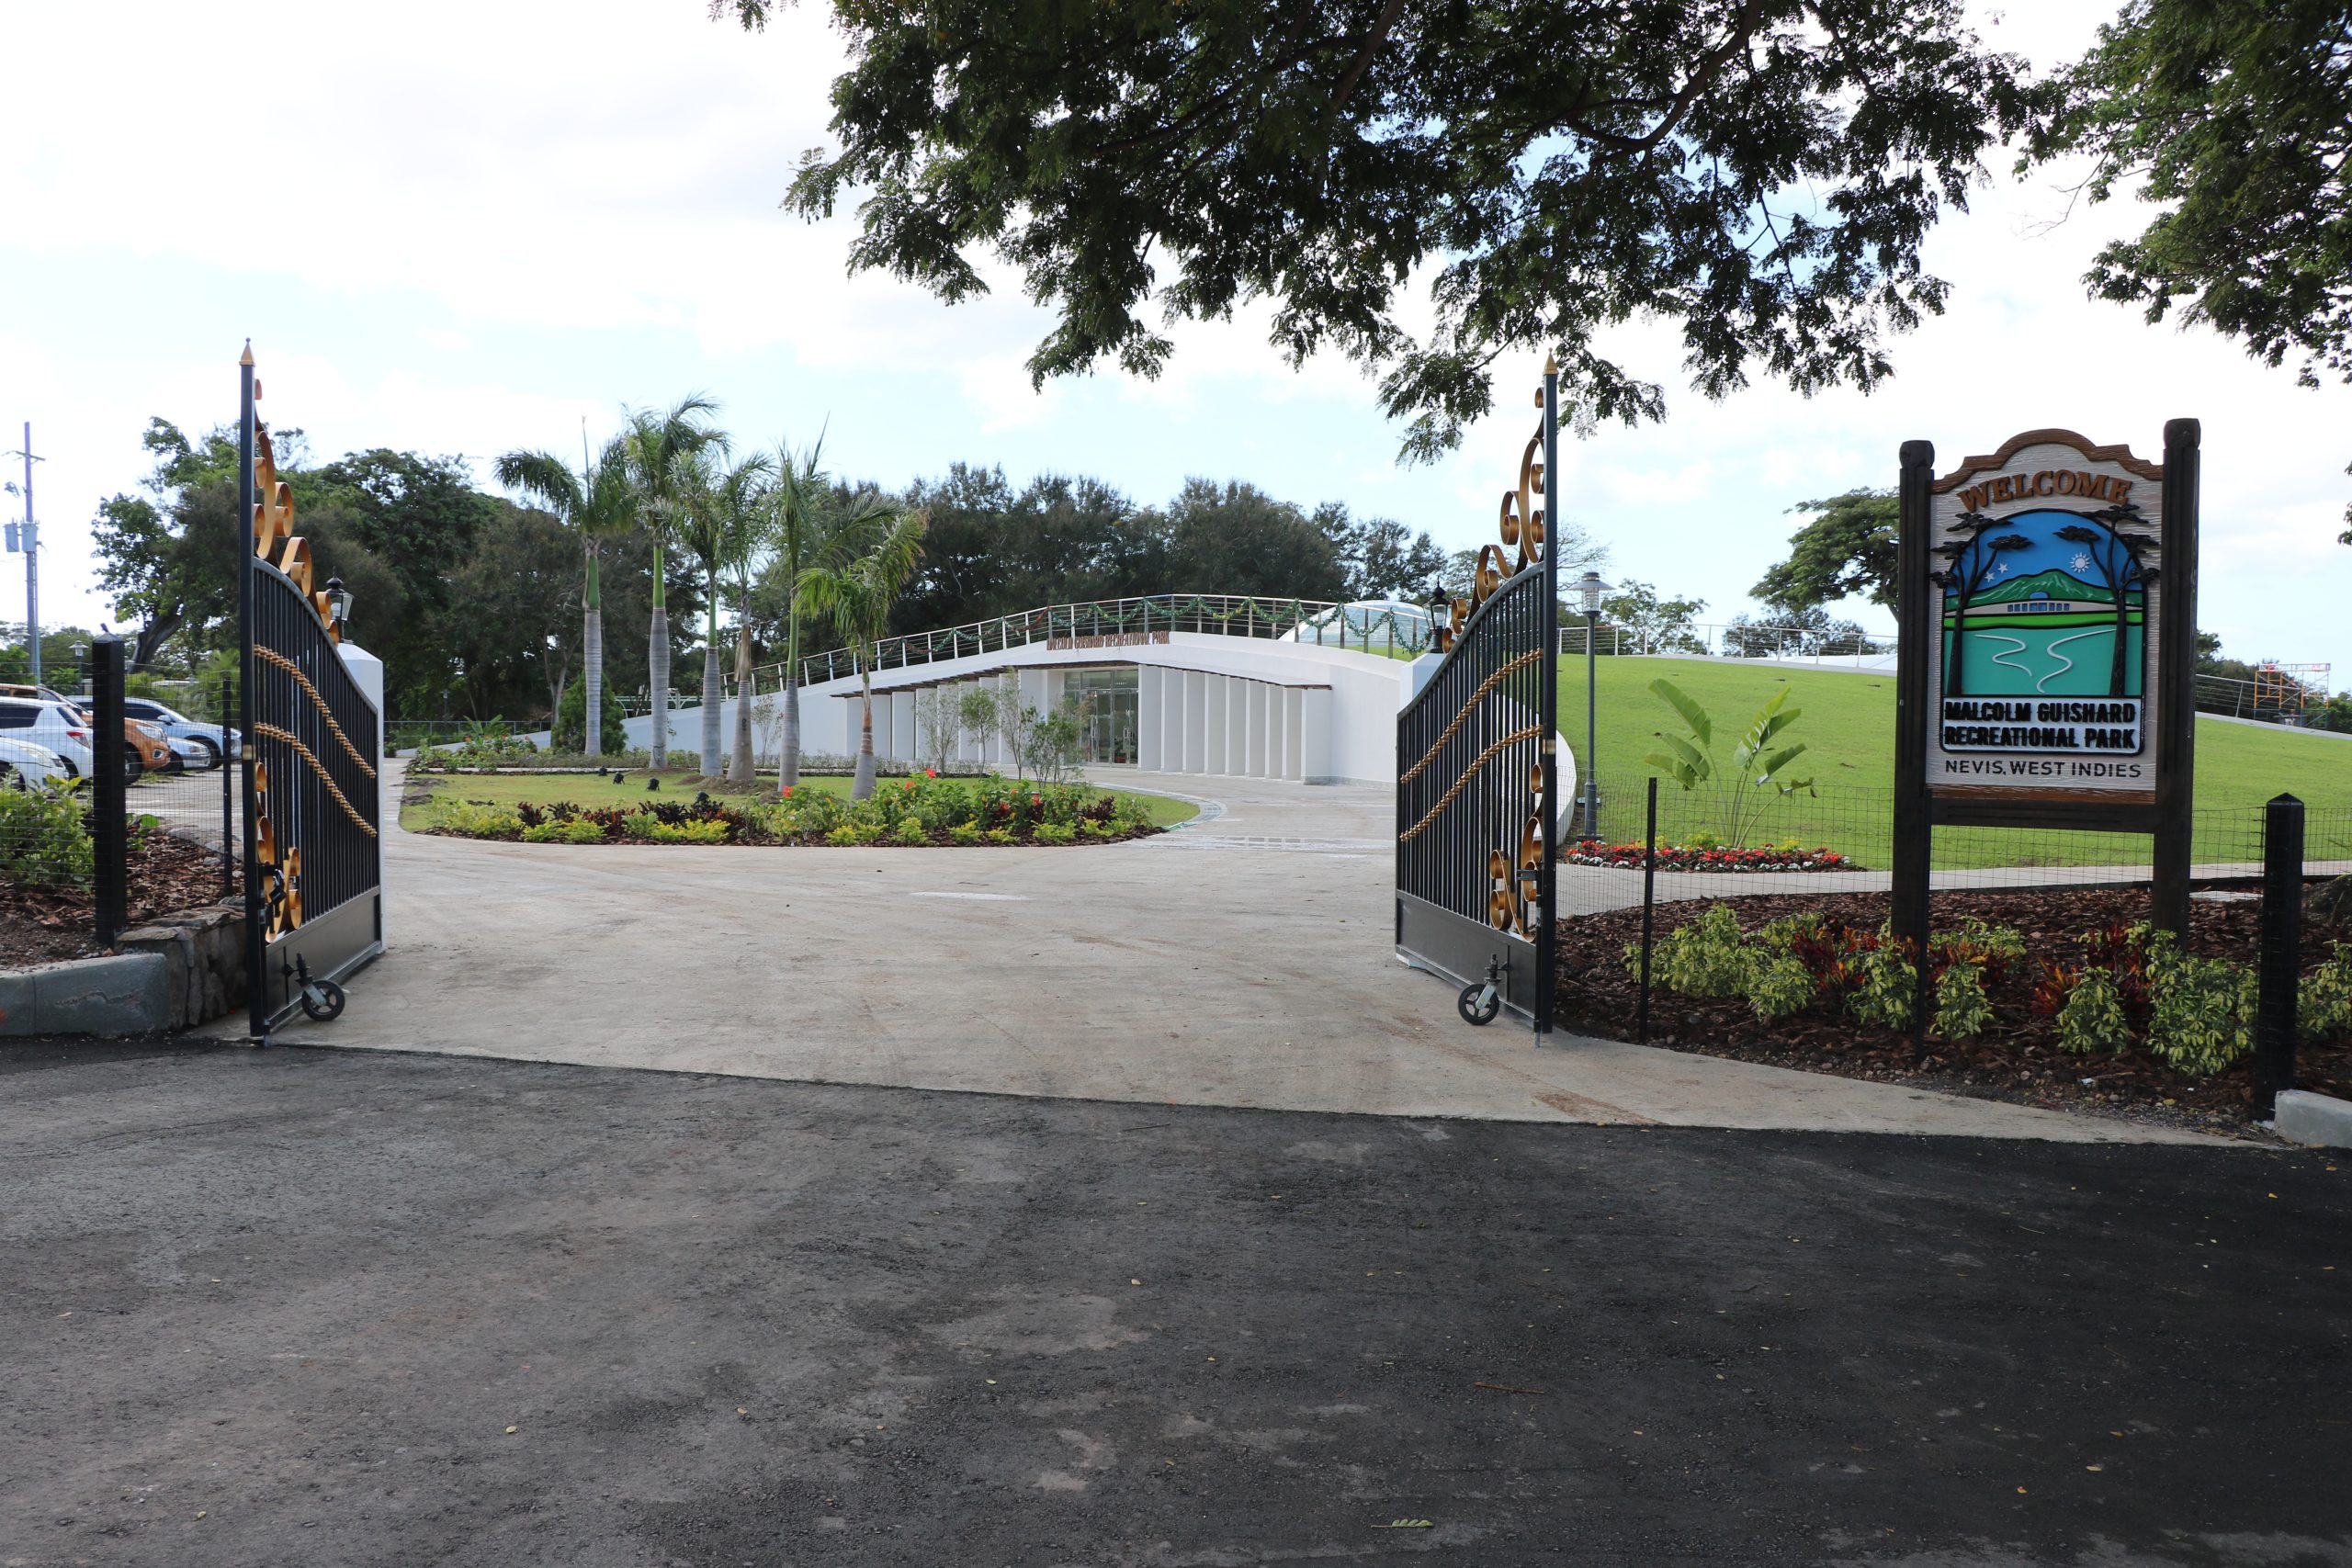 The welcome sign and entry to the Malcolm Guishard Recreational Park on December 20, 2021